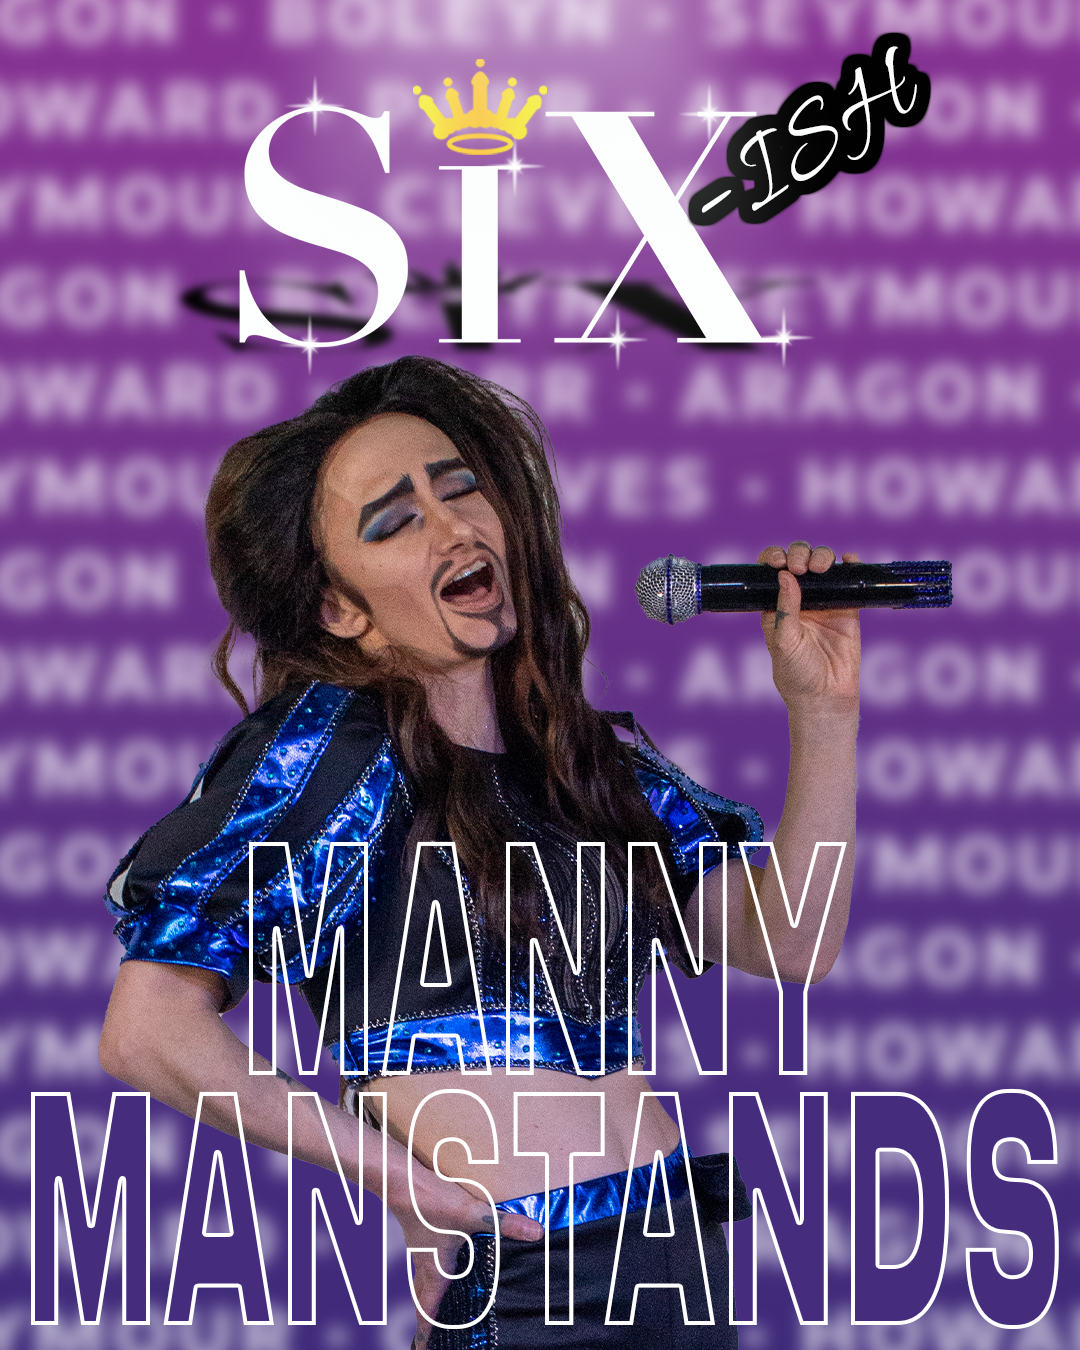 1080x1350_sixish_mannymanstands.png